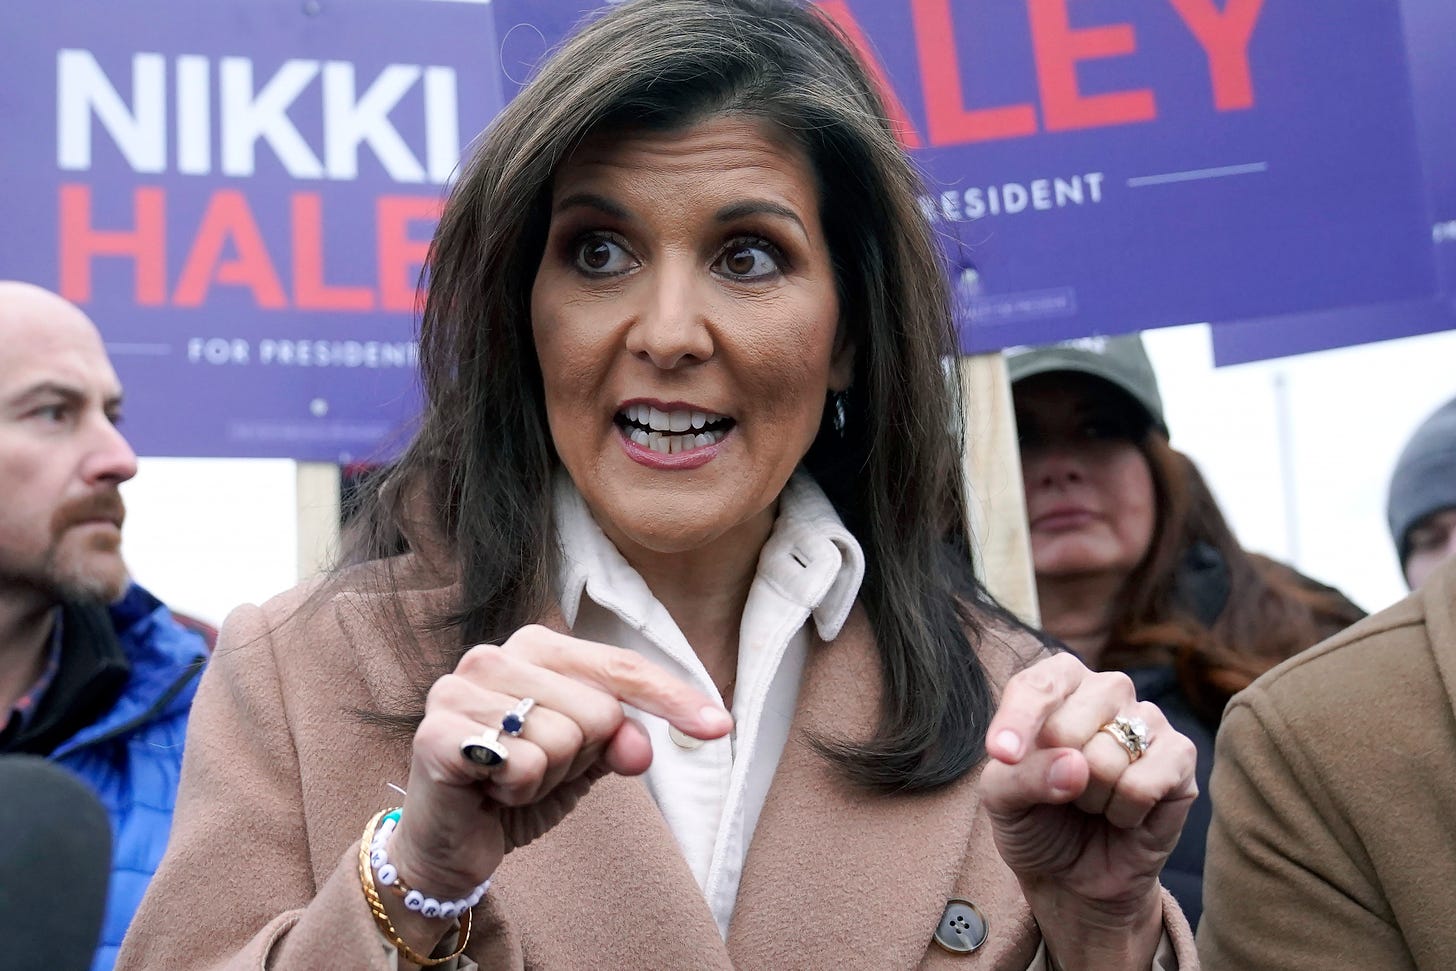 Nikki Haley addresses members of the media in New Hampshire.